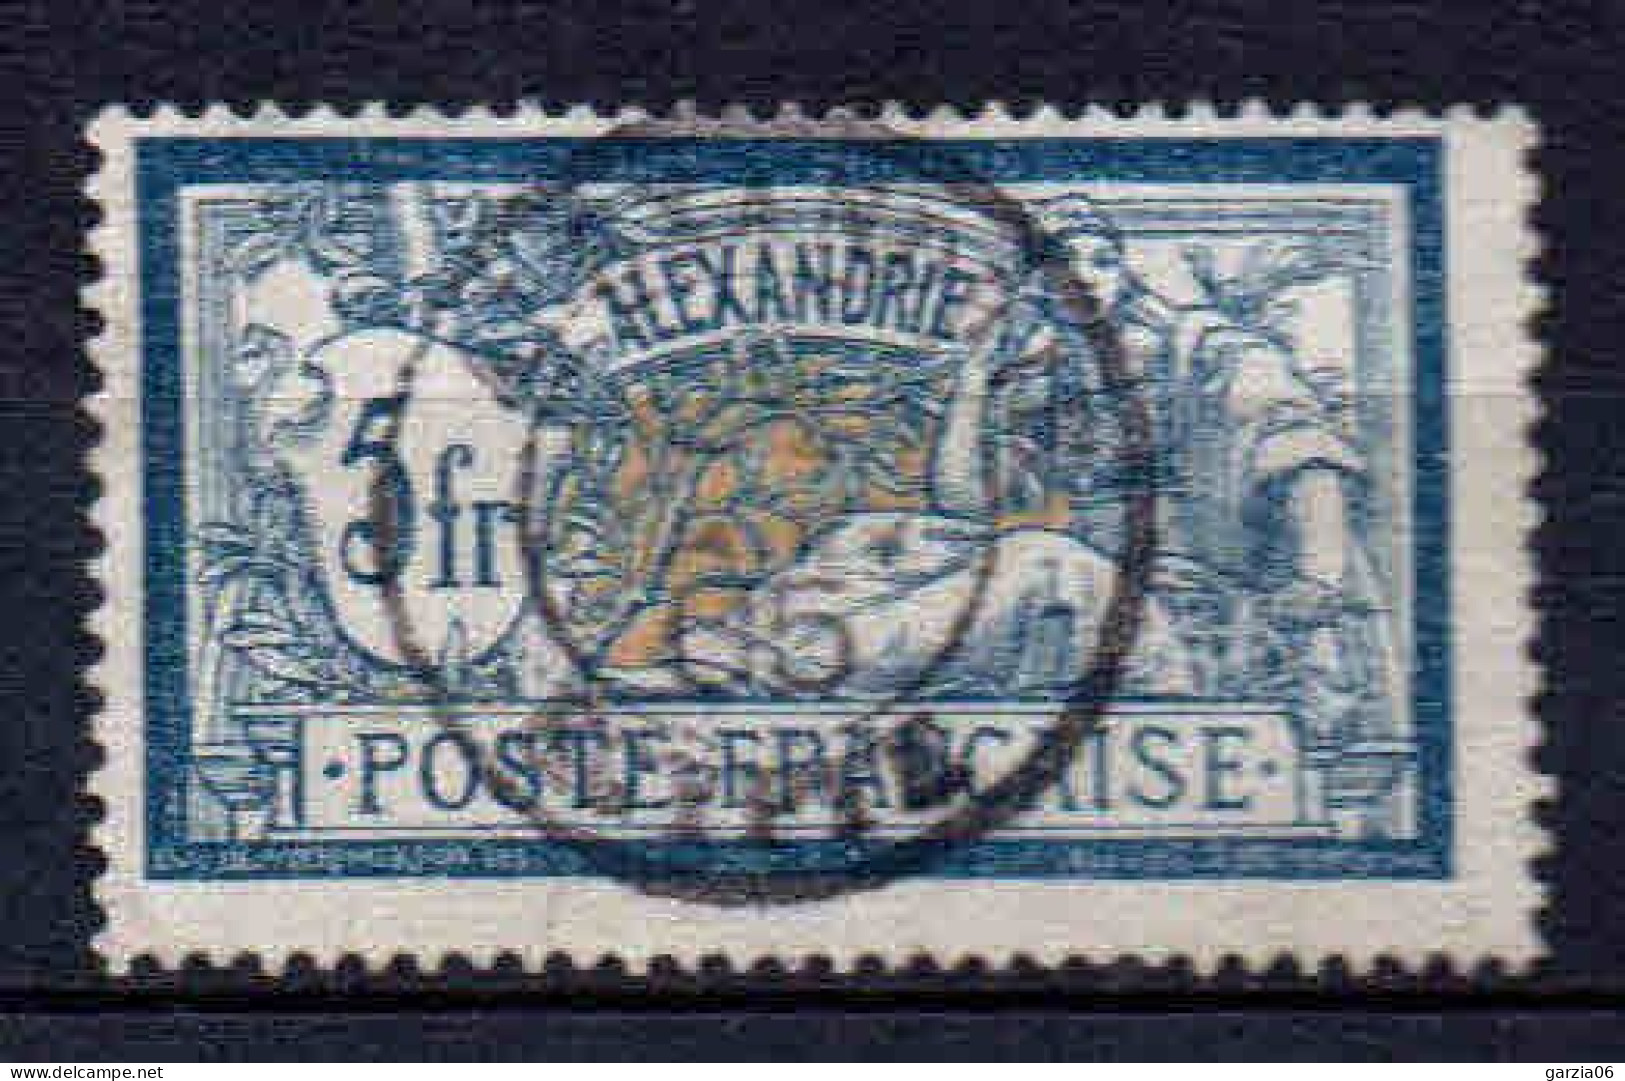 Alexandrie - 1902 -  Type Merson  -  N° 33 - Oblit - Used - Used Stamps